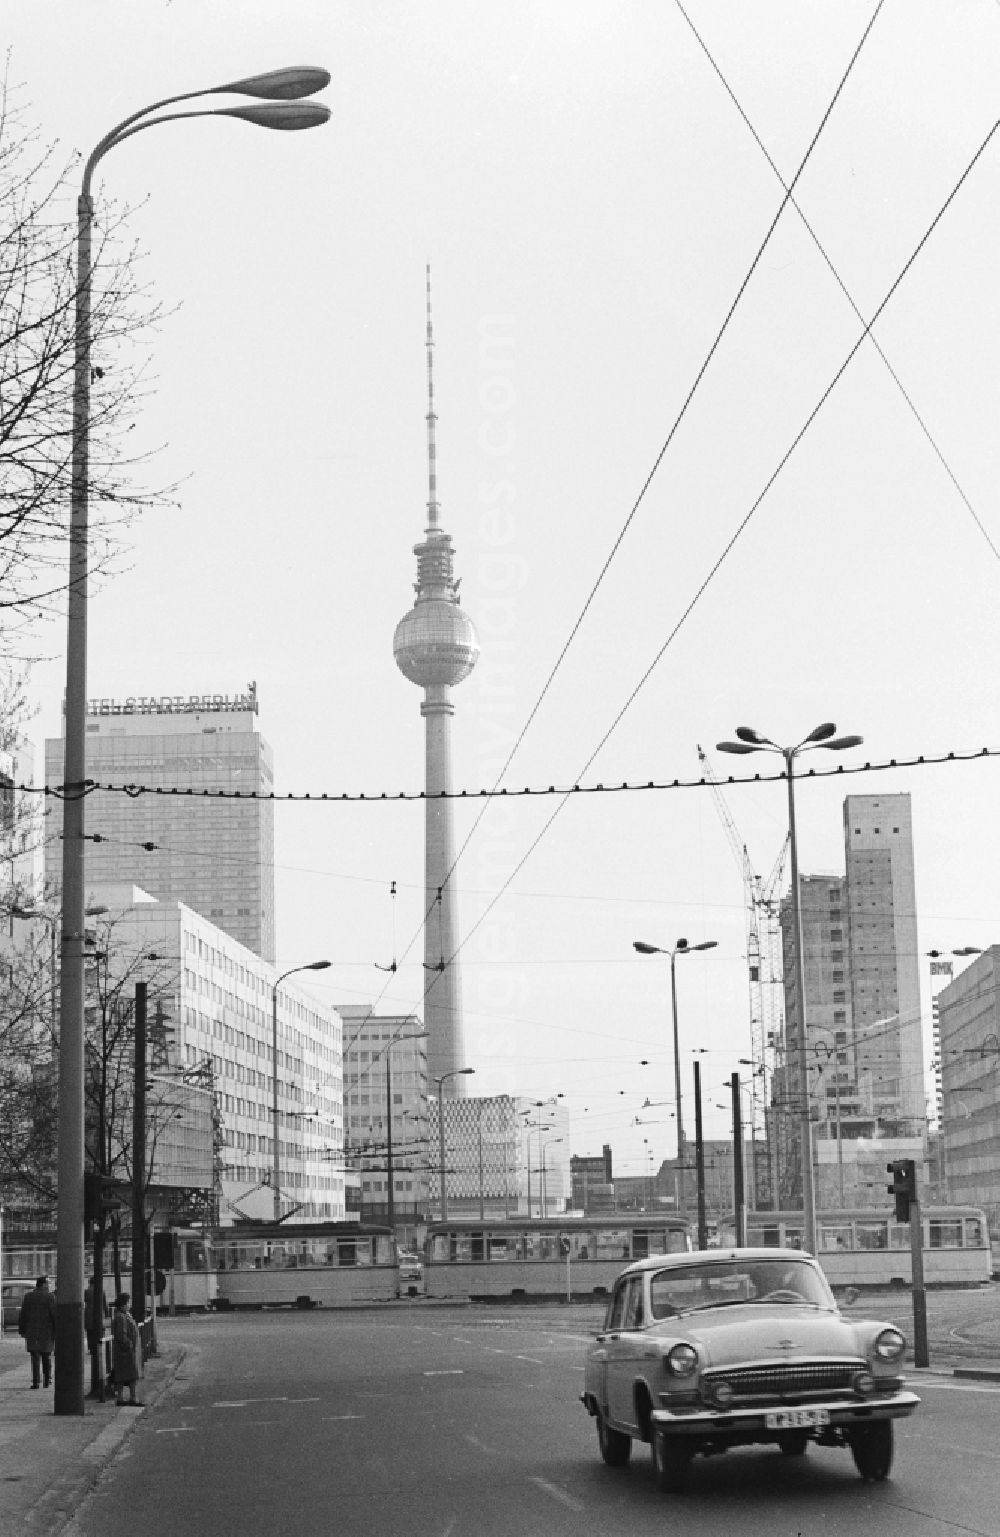 GDR image archive: Berlin - View from the Prenzlauer Allee on the Karl-Liebknecht-Strasse towards Alexanderplatz in Berlin. In the background of the Berlin TV Tower, the Hotel Stadt Berlin and the Centrum department store at Alexanderplatz